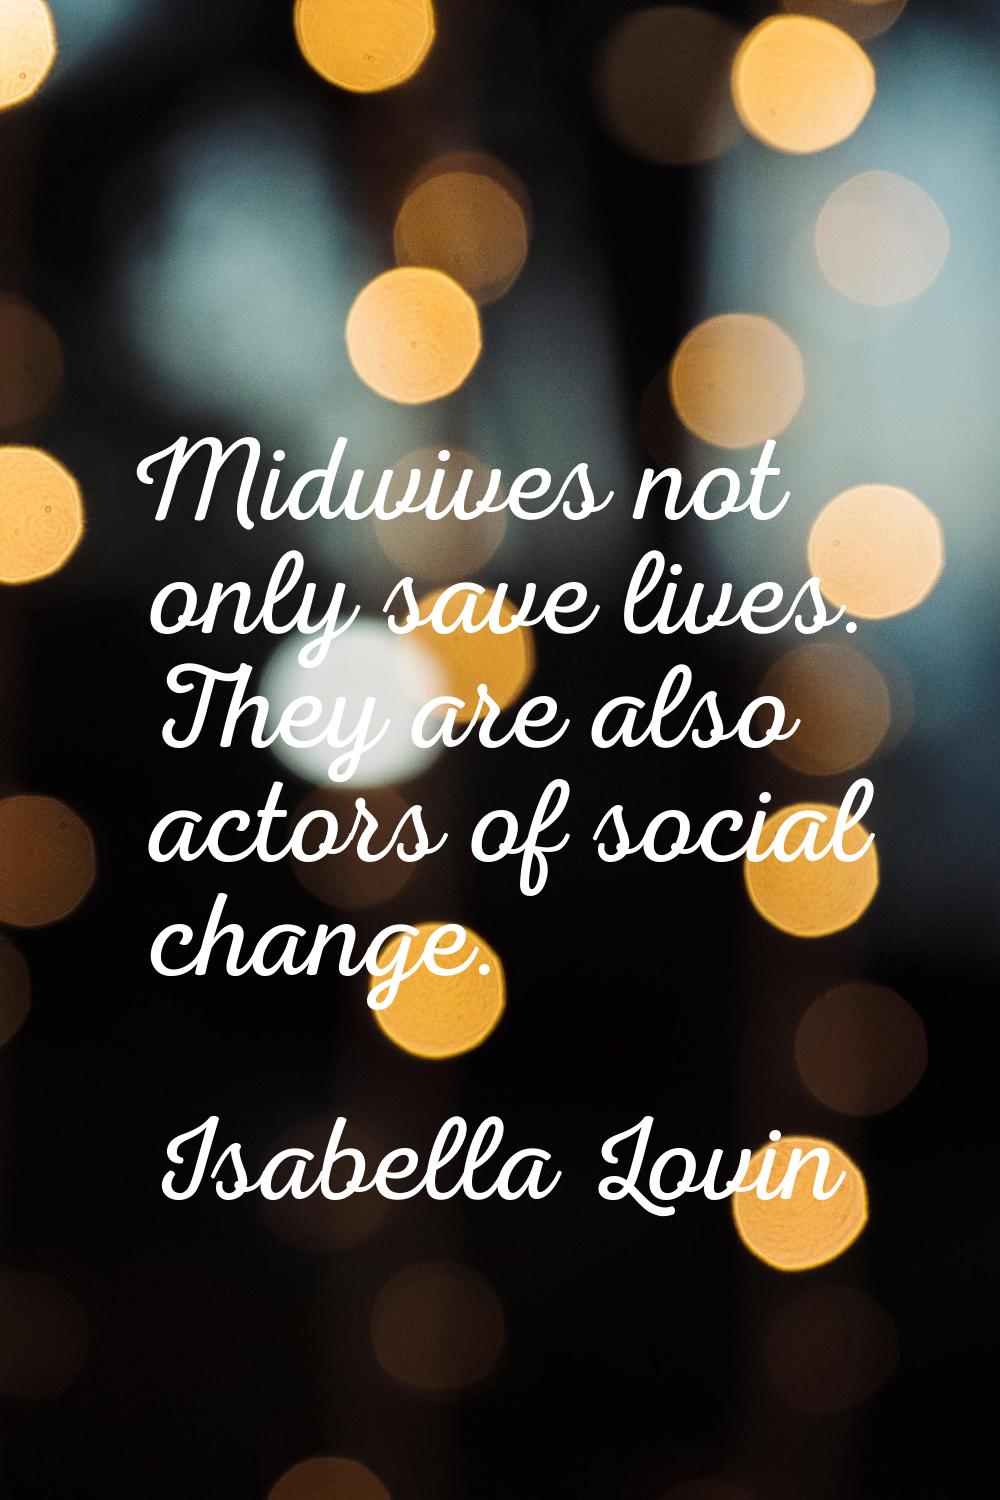 Midwives not only save lives. They are also actors of social change.